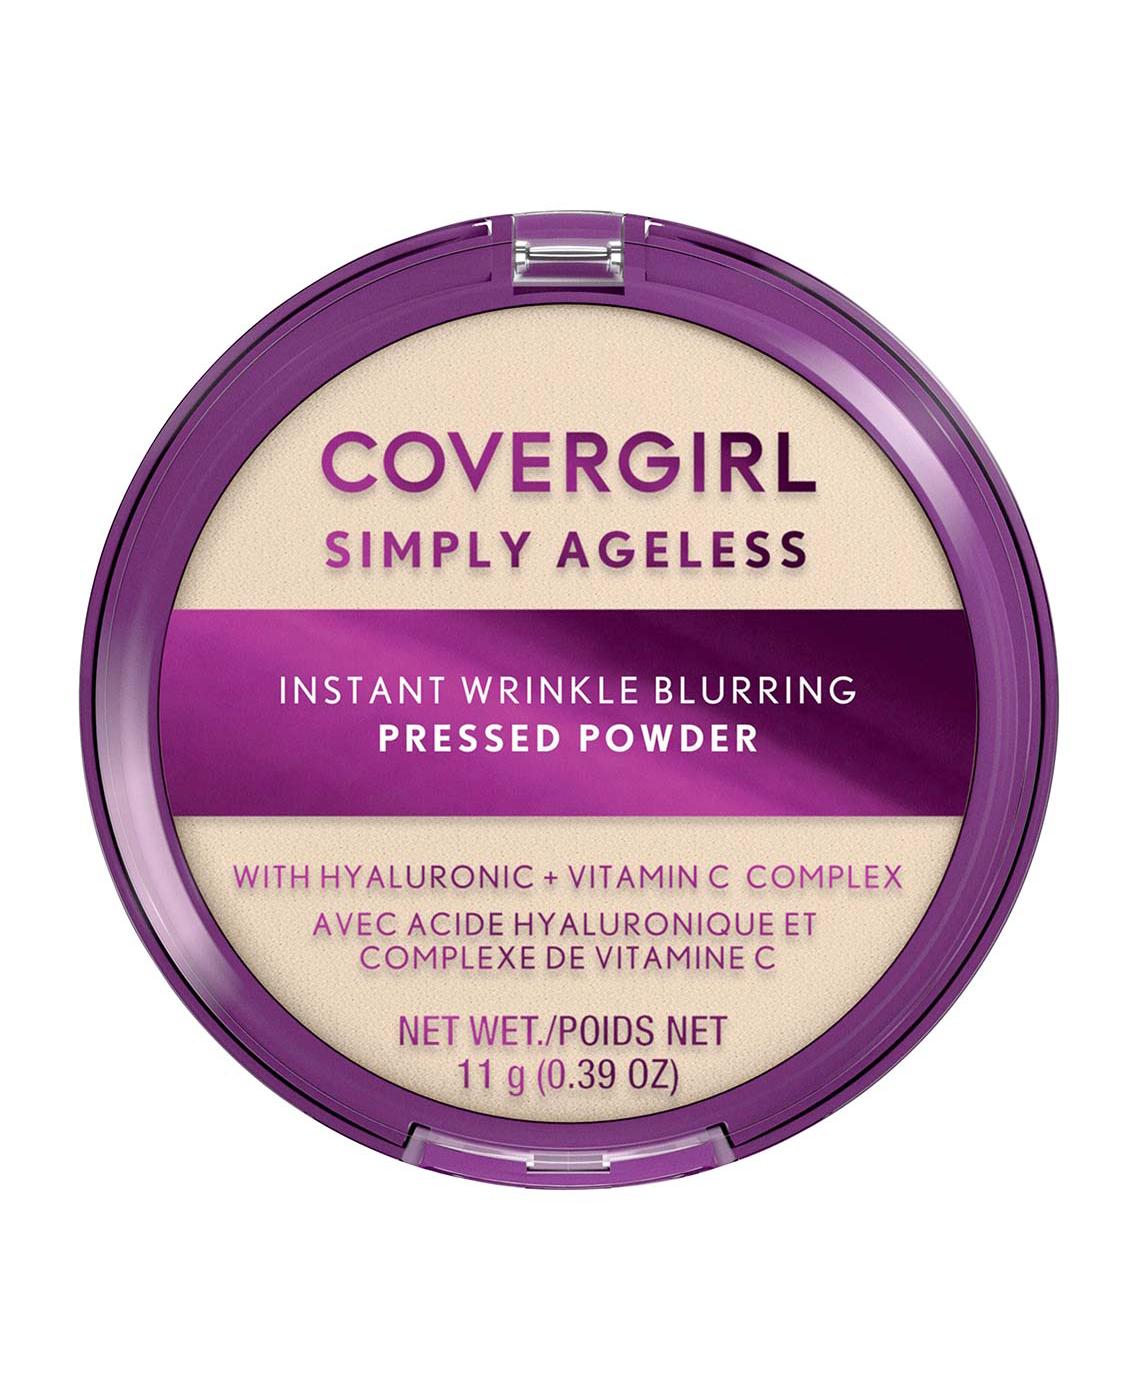 Covergirl Simply Ageless Pressed Powder 100 Translucent; image 1 of 10